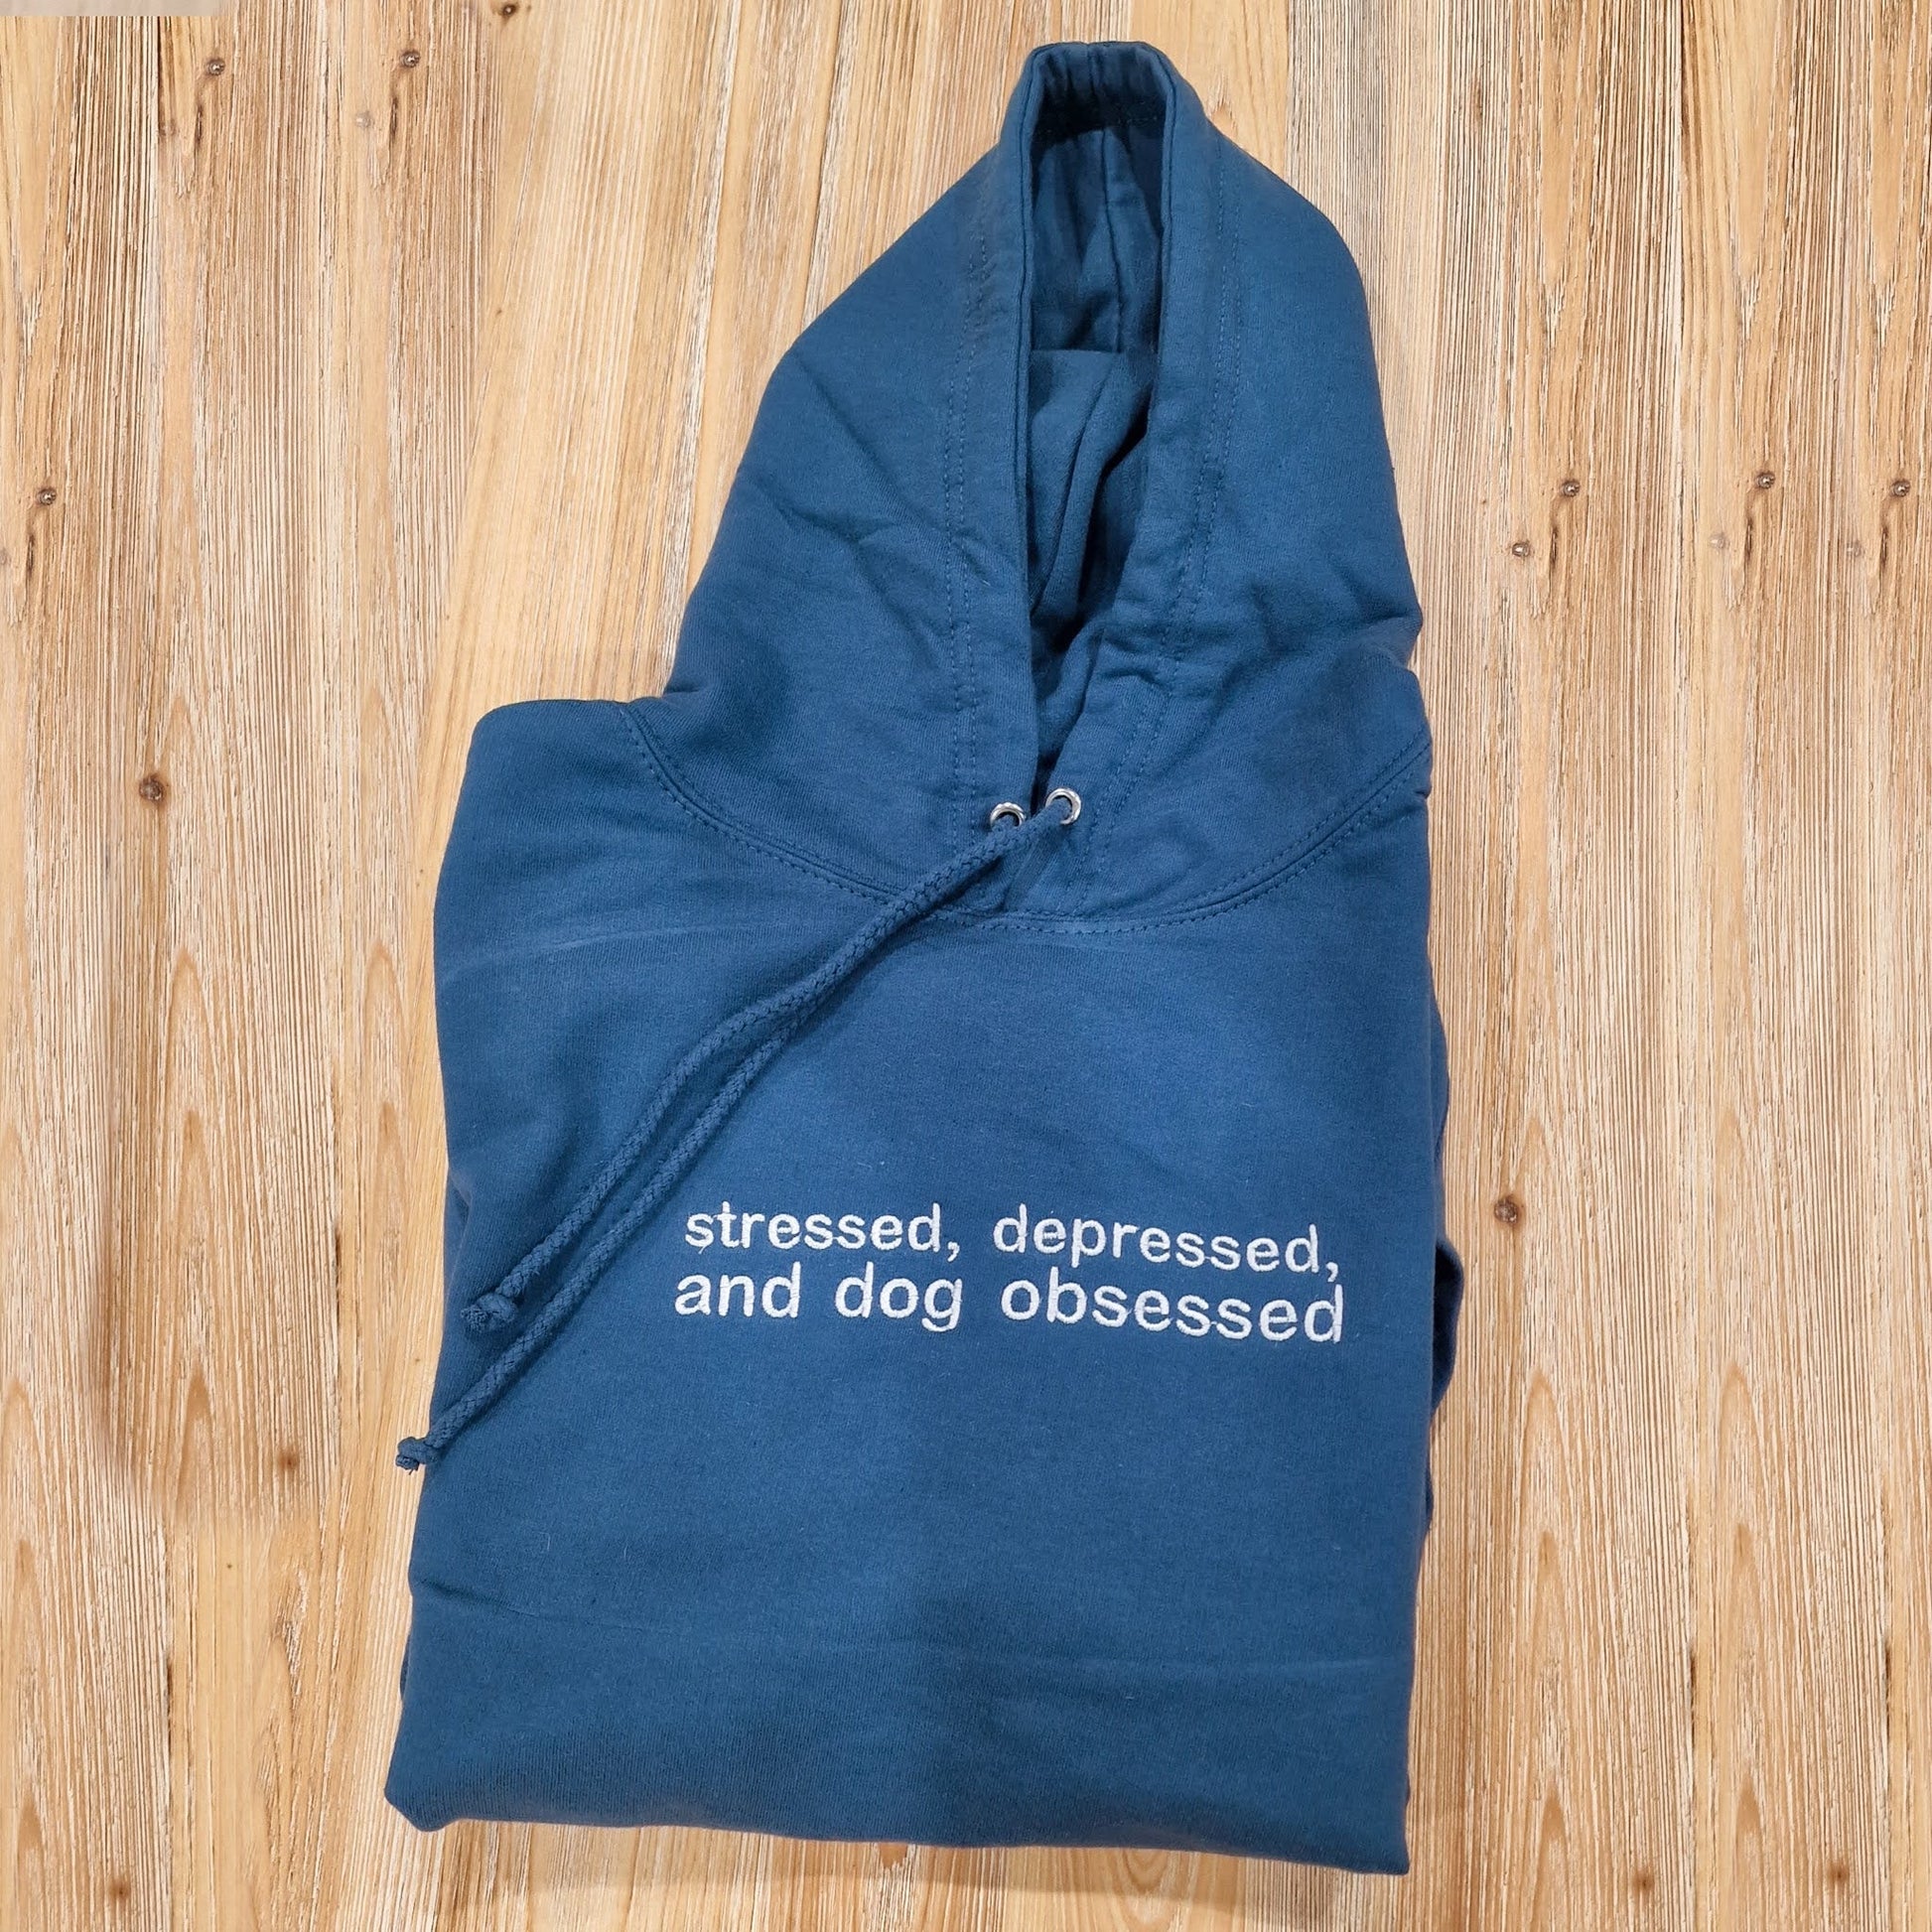 Patch&PopsBoutique Stressed, Depressed, and Dog Obsessed - Hoodie